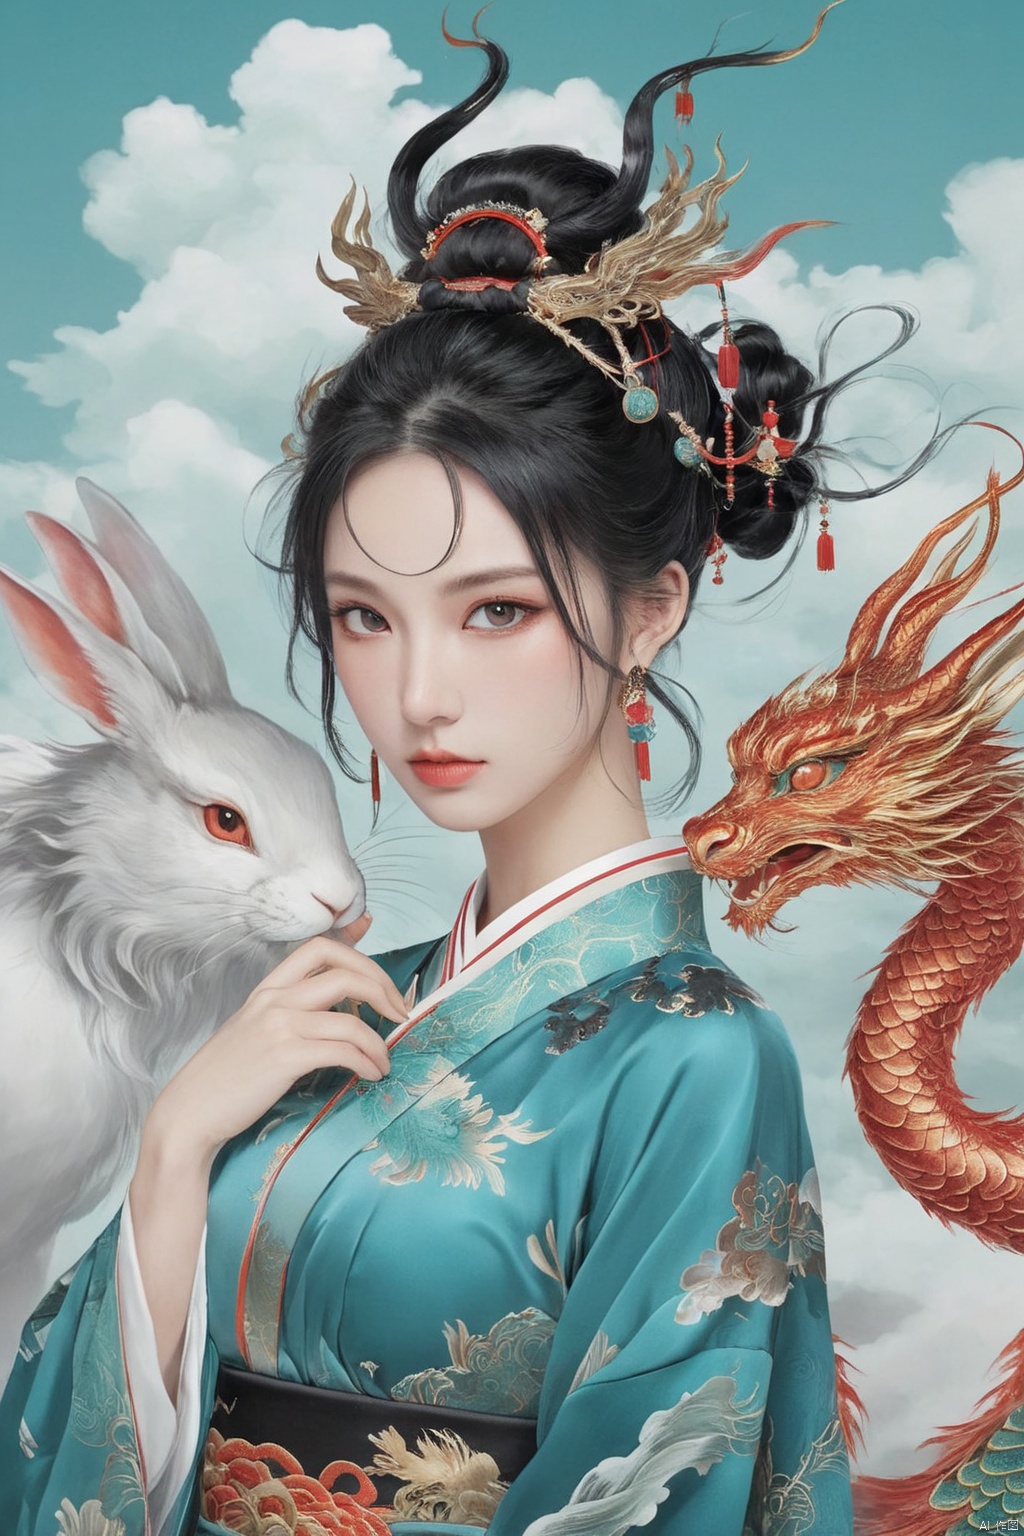 Illustration, digital art, anime style, hubggirl, red eyes, black hair, hair bun with accessories, traditional East Asian attire, rabbit ears headpiece, black and teal clothing, cloud pattern on garment, mystical, two dragons, one on shoulder and one in foreground, pale skin, blush on cheeks, serious expression, white background, portrait, upper body shot, artful composition, detailed line art, vibrant color contrast., HUBG_Beauty_Girl, GUOFENG